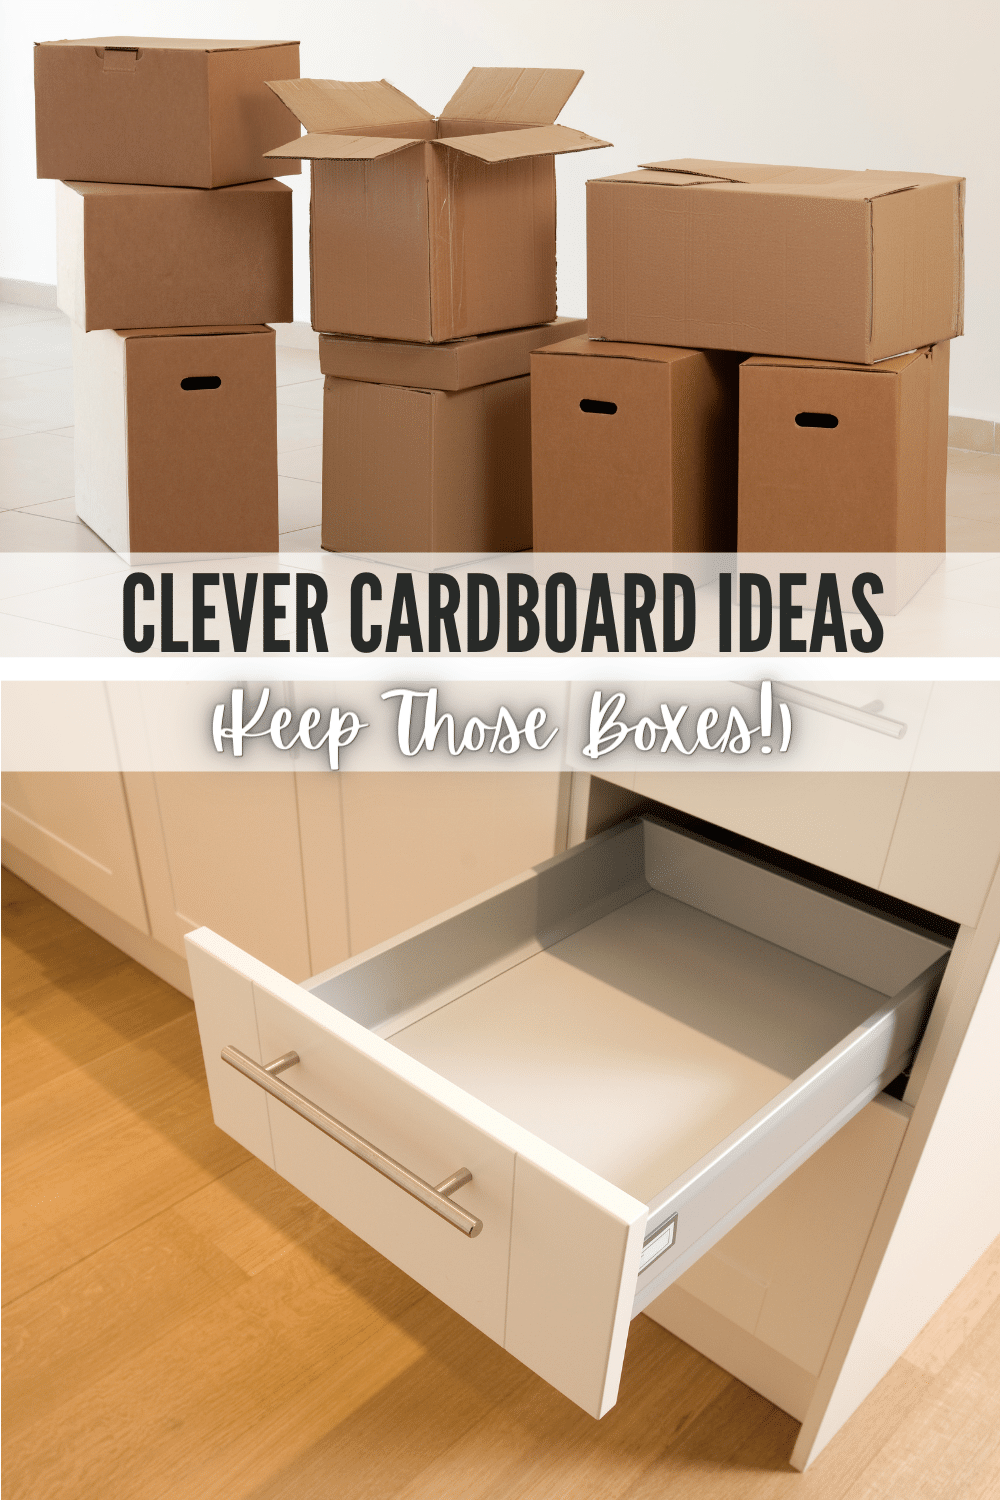 If you hate throwing out boxes, you're going to love these clever cardboard ideas. Here's a list of things to do with a box if you want to repurpose it. #repurpose #recycle #cardboard via @wondermomwannab